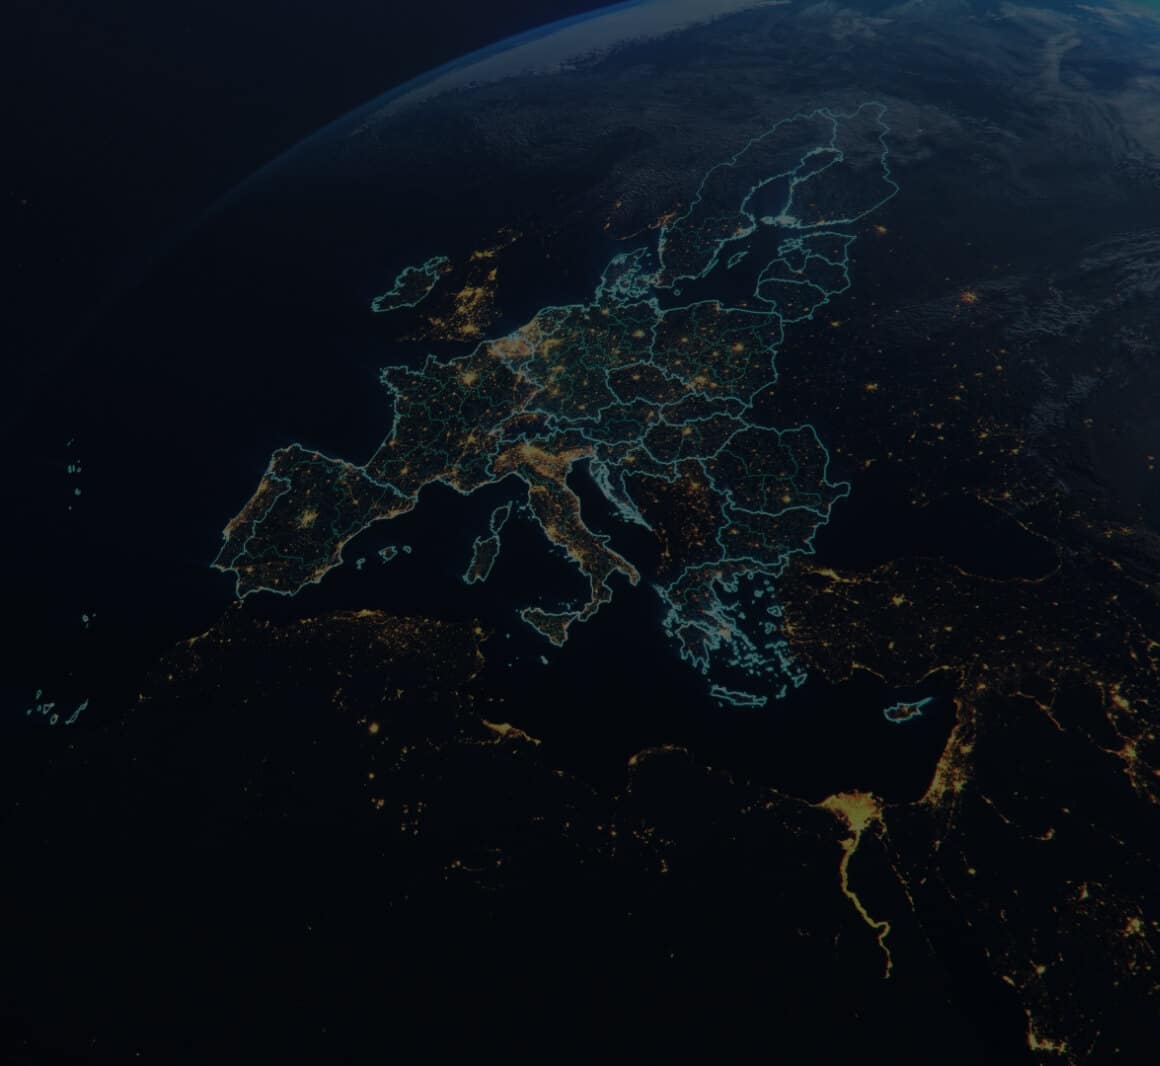 satelite view of europe at night from space with countries outlined in blue